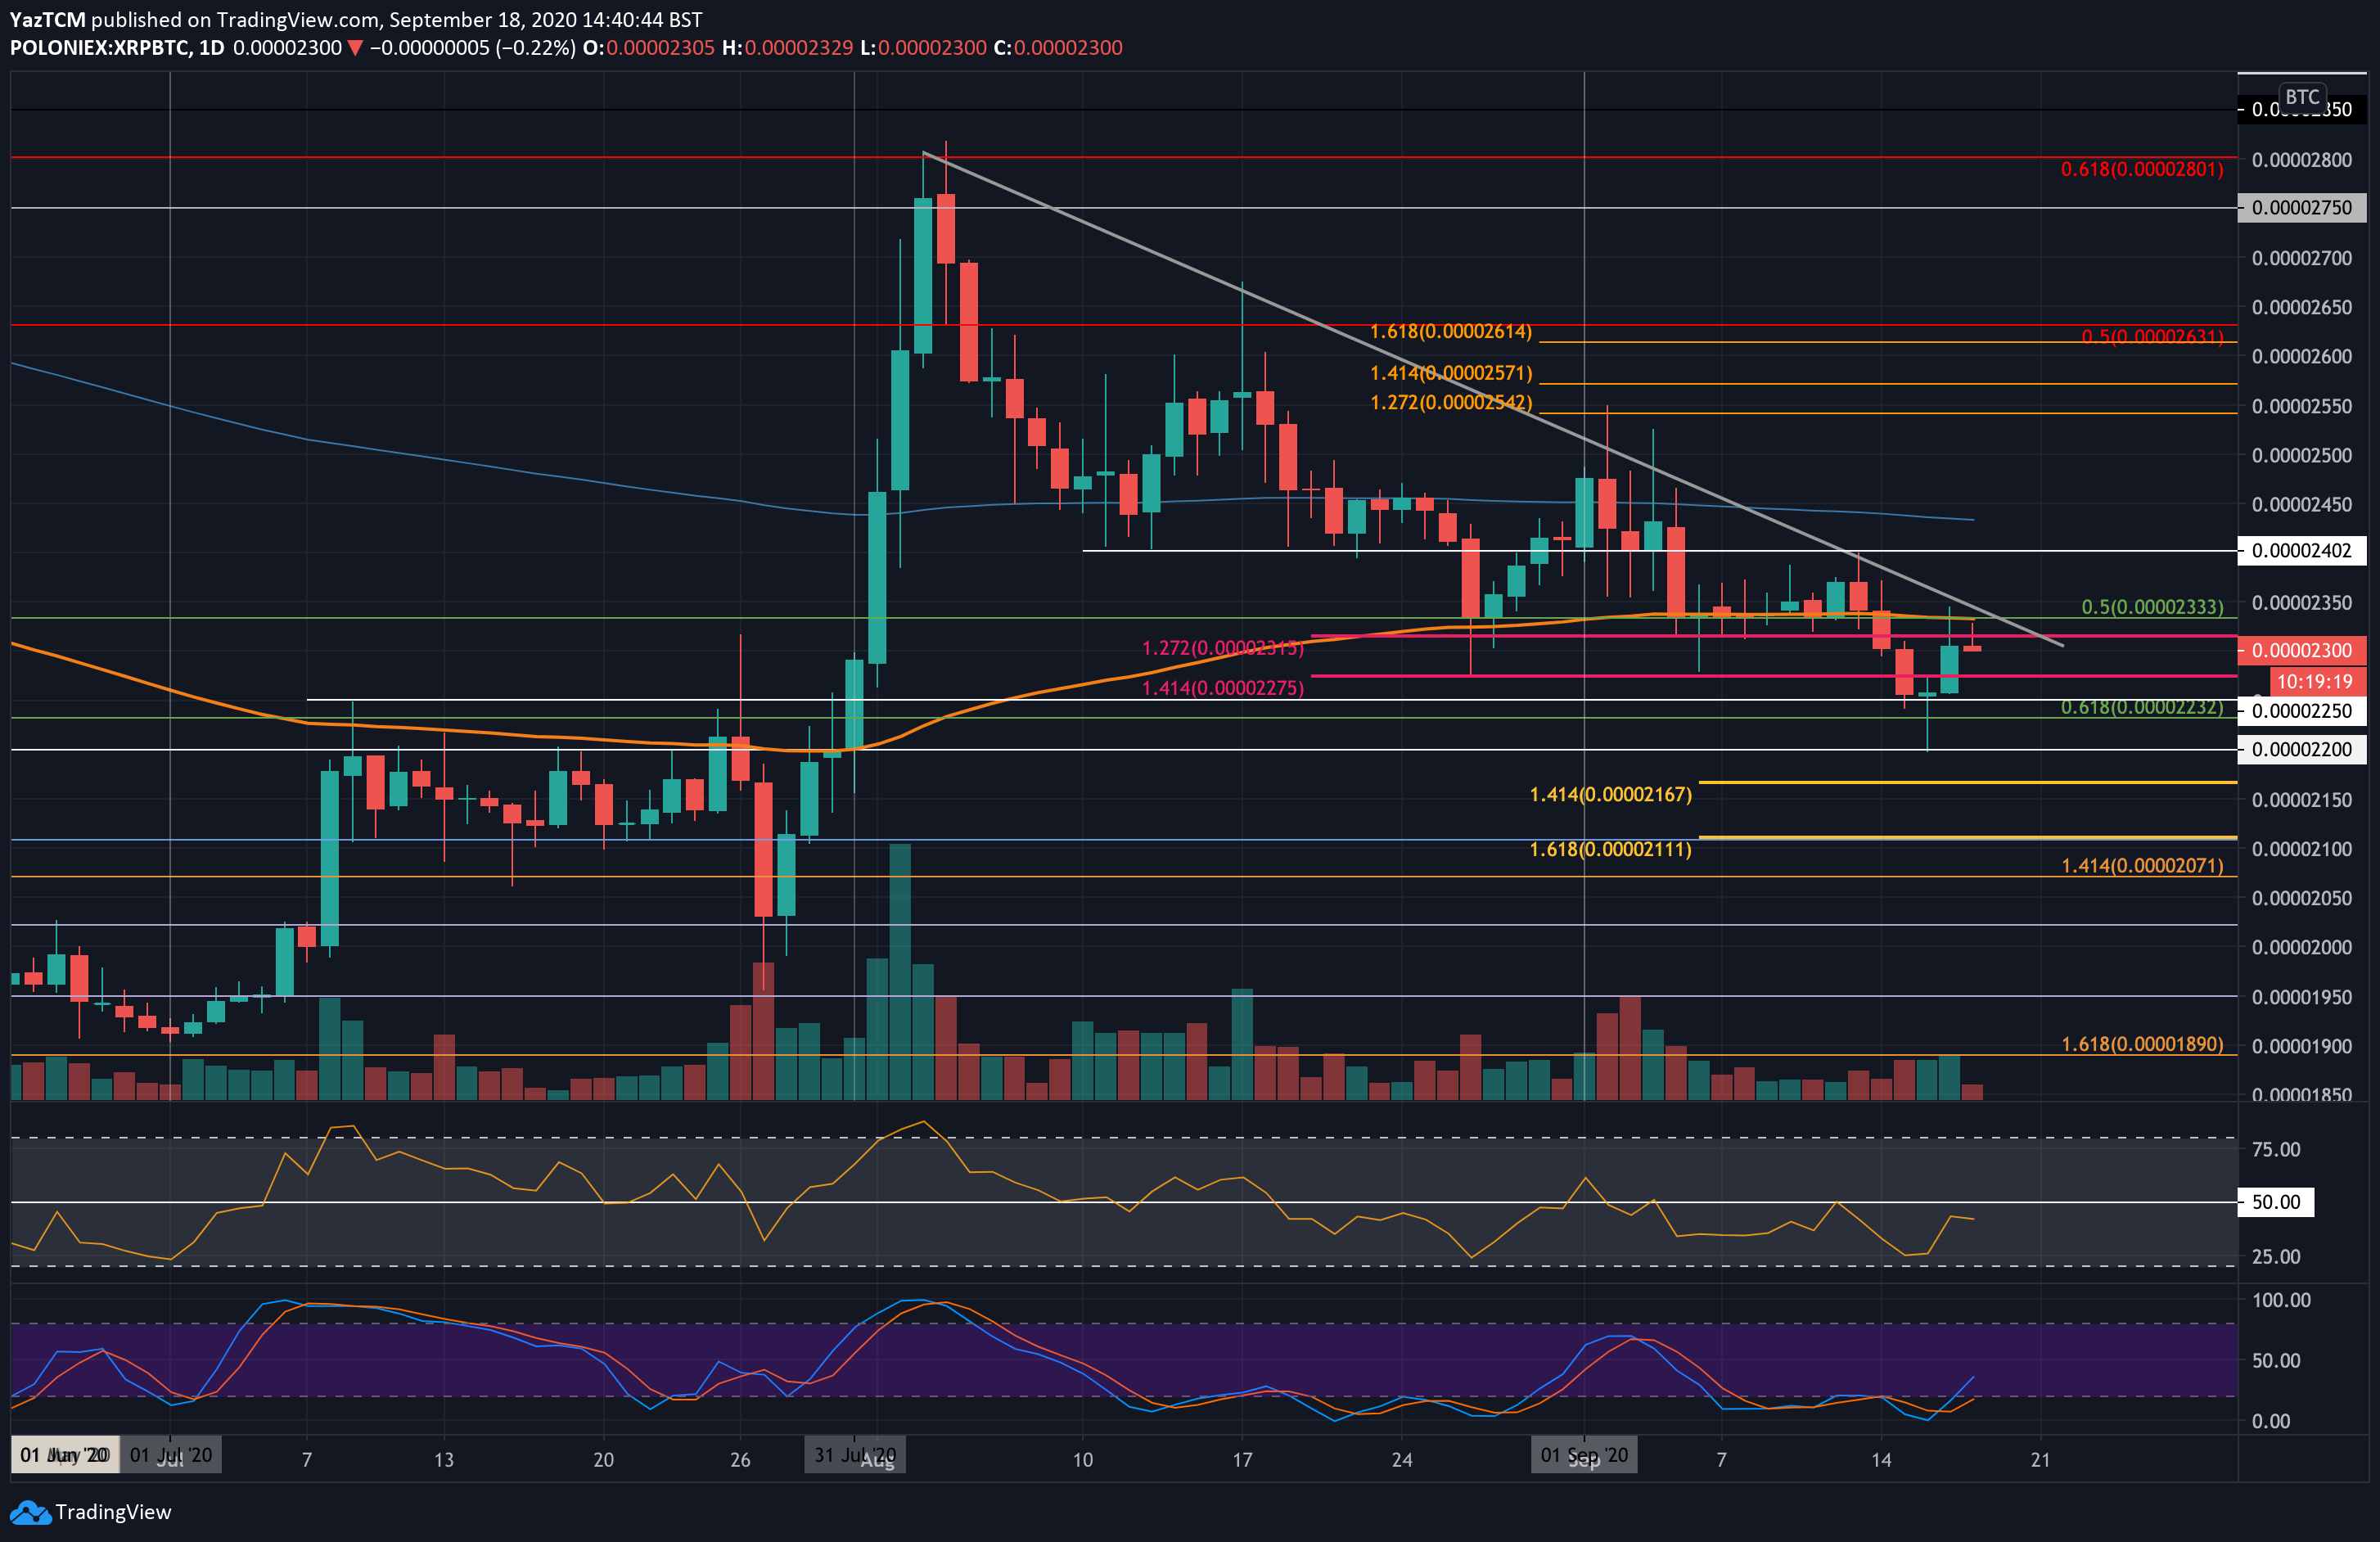 Crypto Price Analysis & Overview September 18th: Bitcoin, Ethereum, Ripple, Binance Coin, and Polkadot